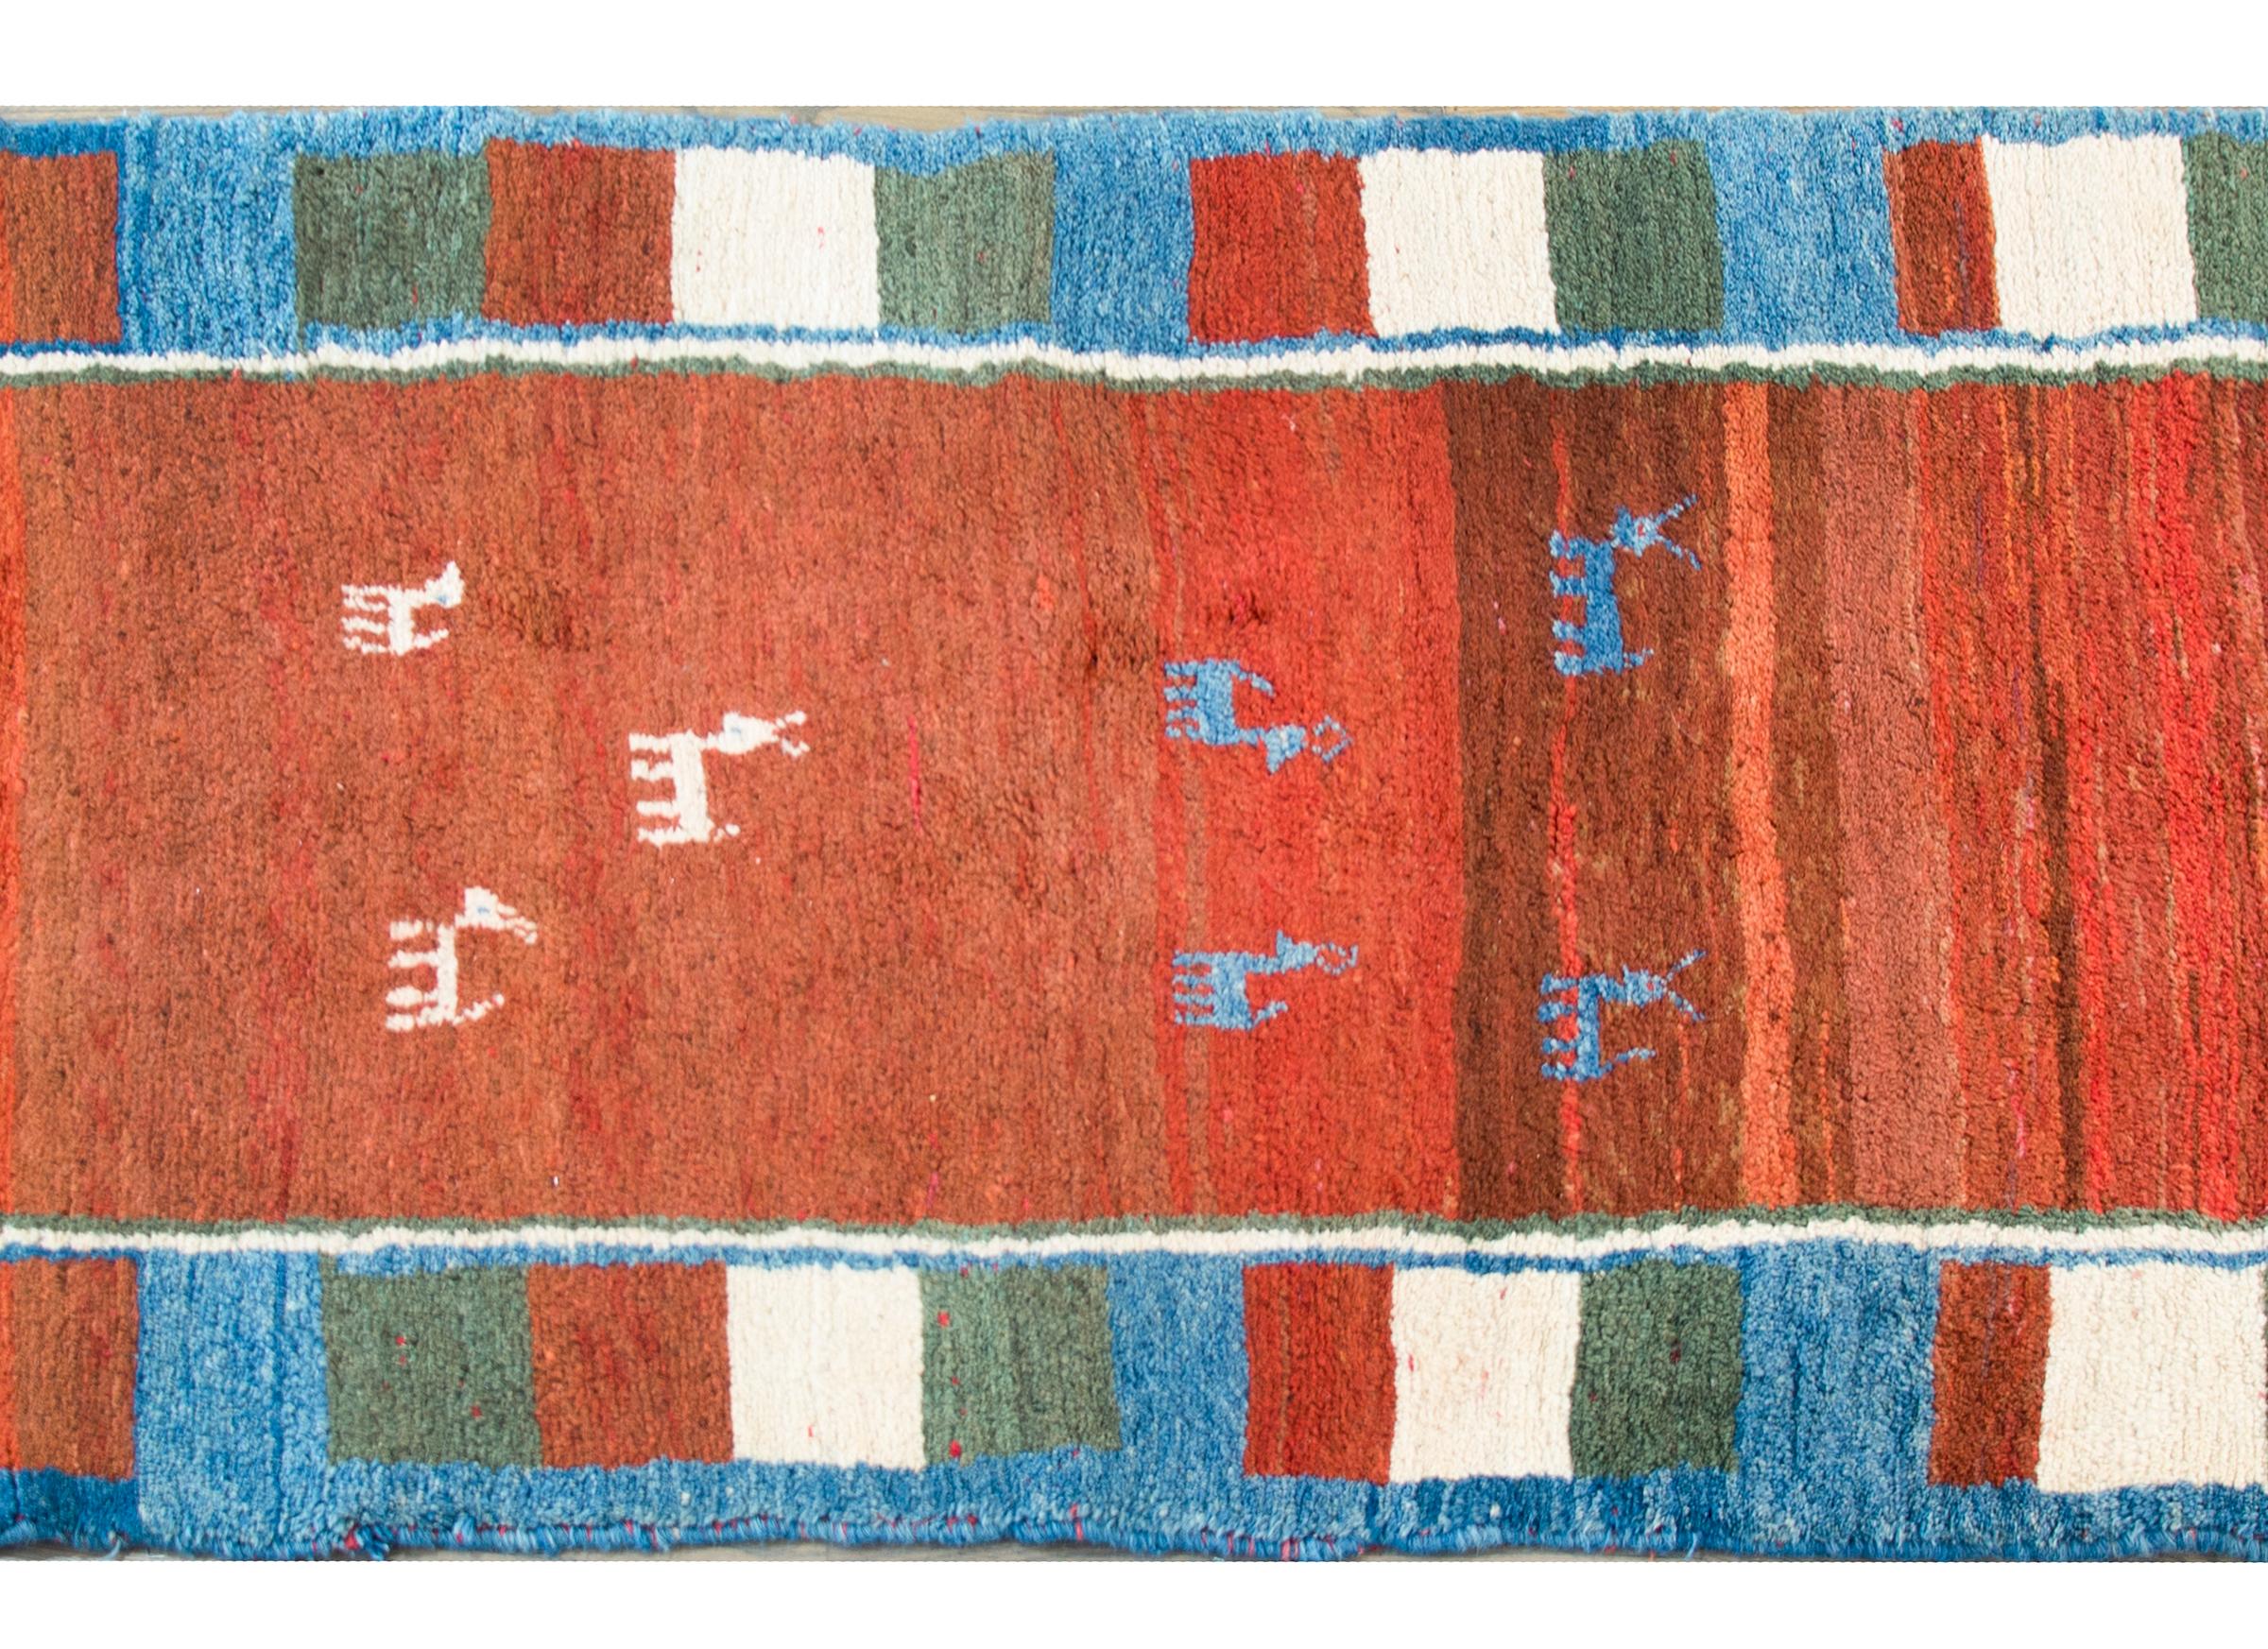 A beautiful bold vintage Persian Gabbeh rug with a n abrash crimson field with several indigo and white goats, and surrounded by a repeated crimson, white, green, and indigo square patterned border.